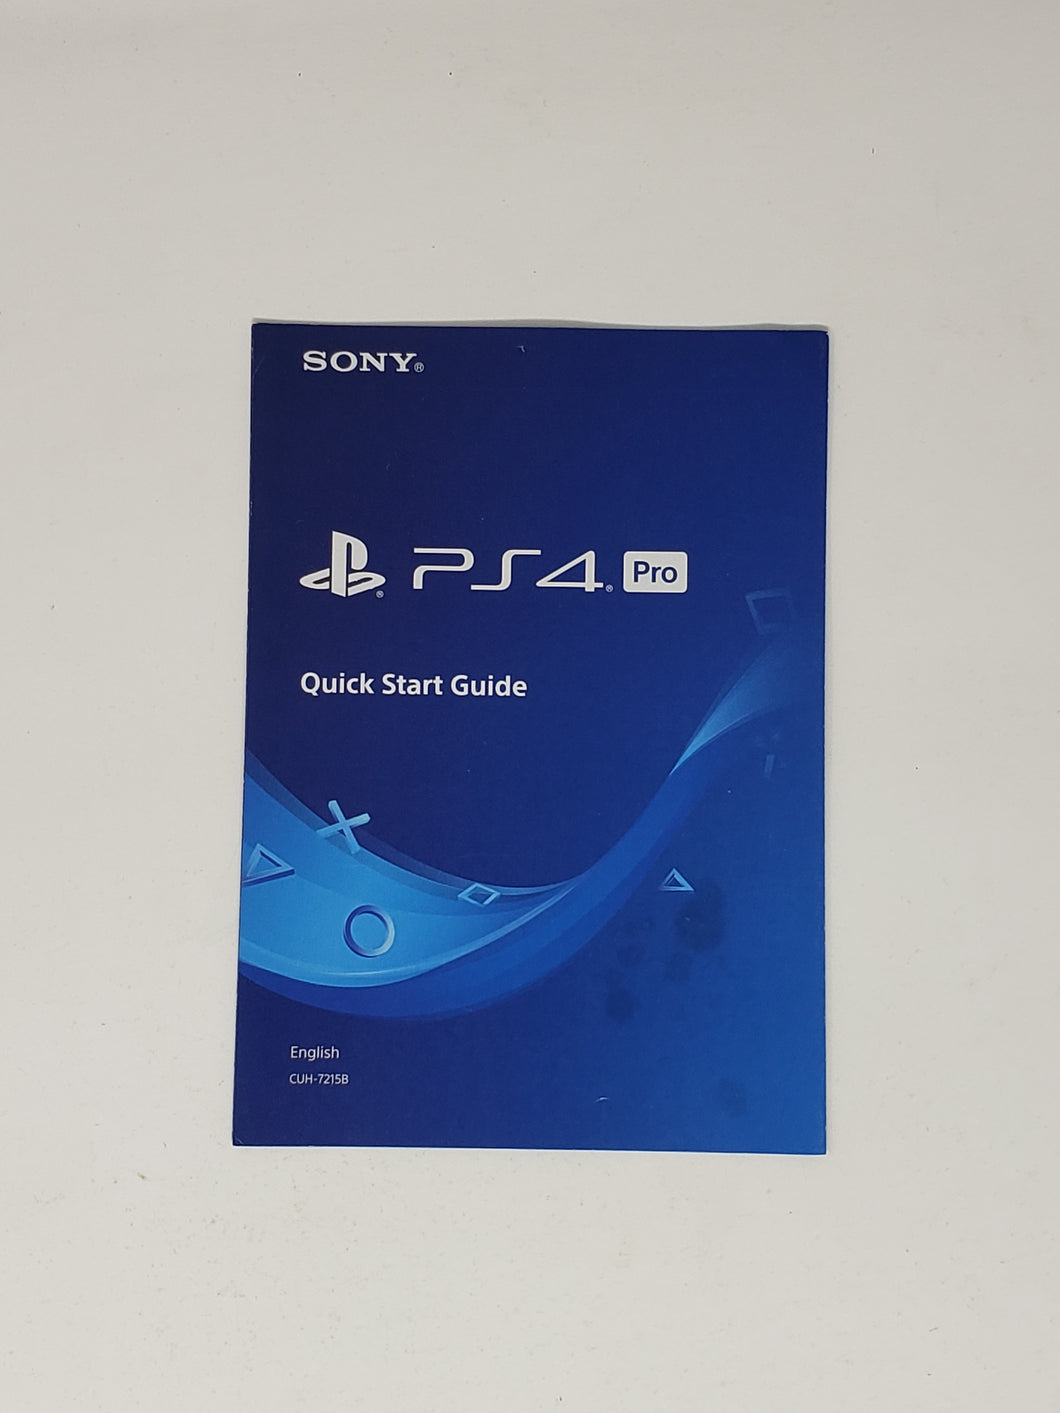 Quick Start Guide [Insert] - Sony Playstation 4 | PS4